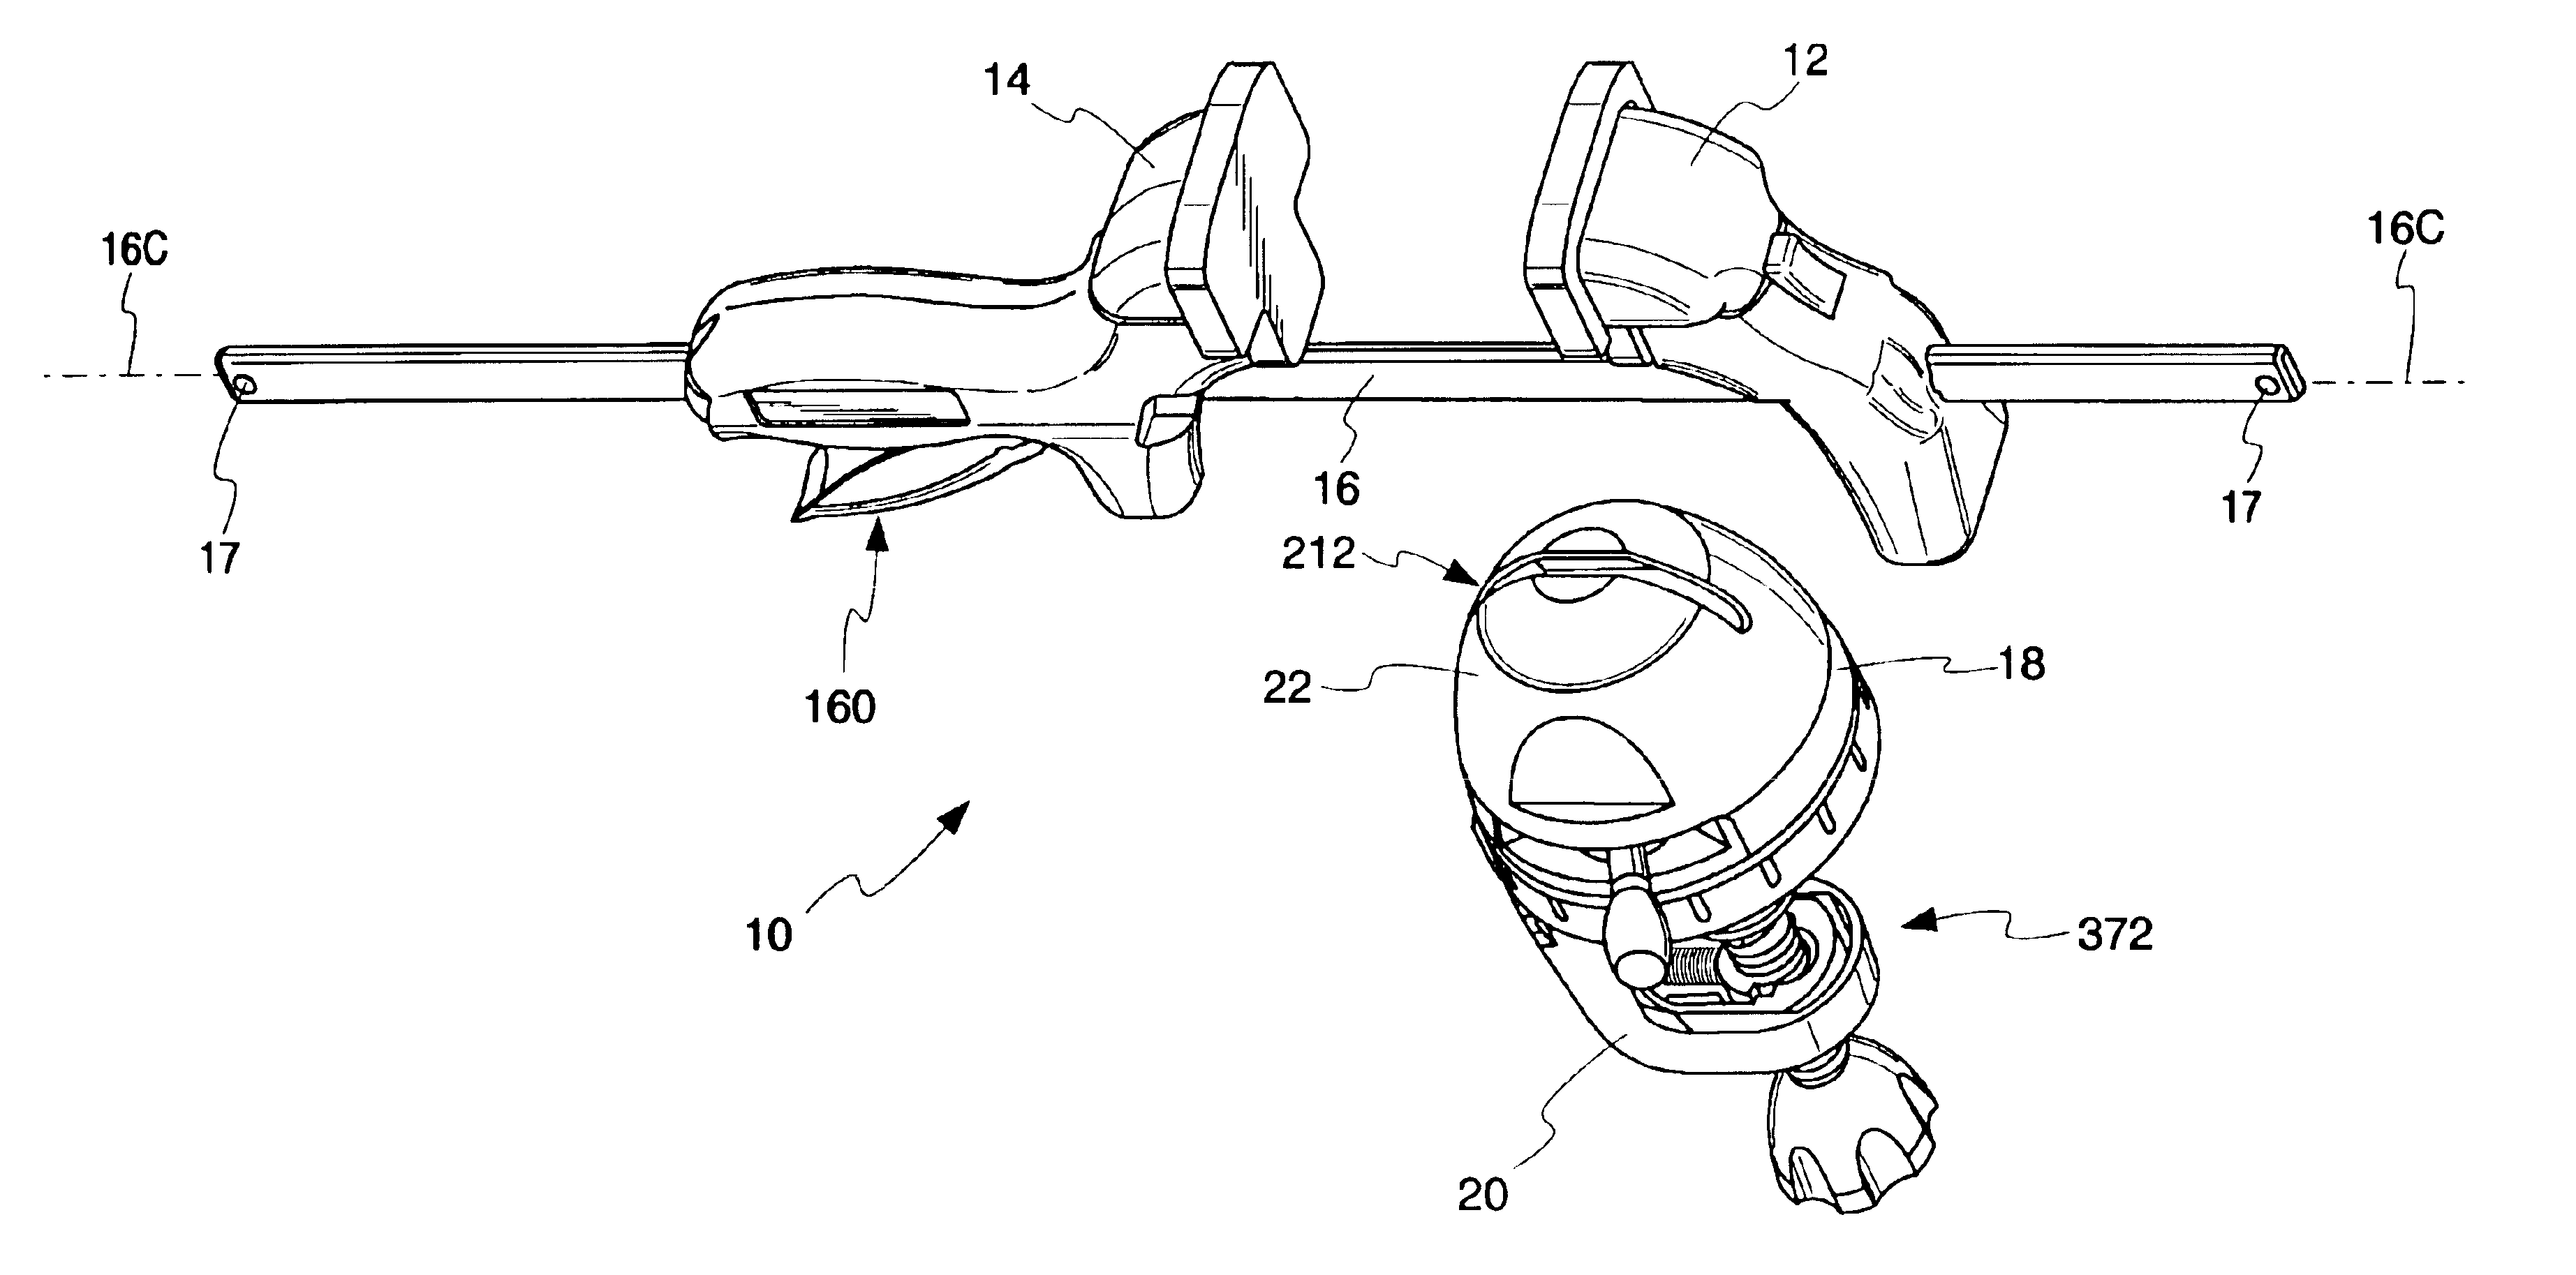 Apparatus for securing a workpiece